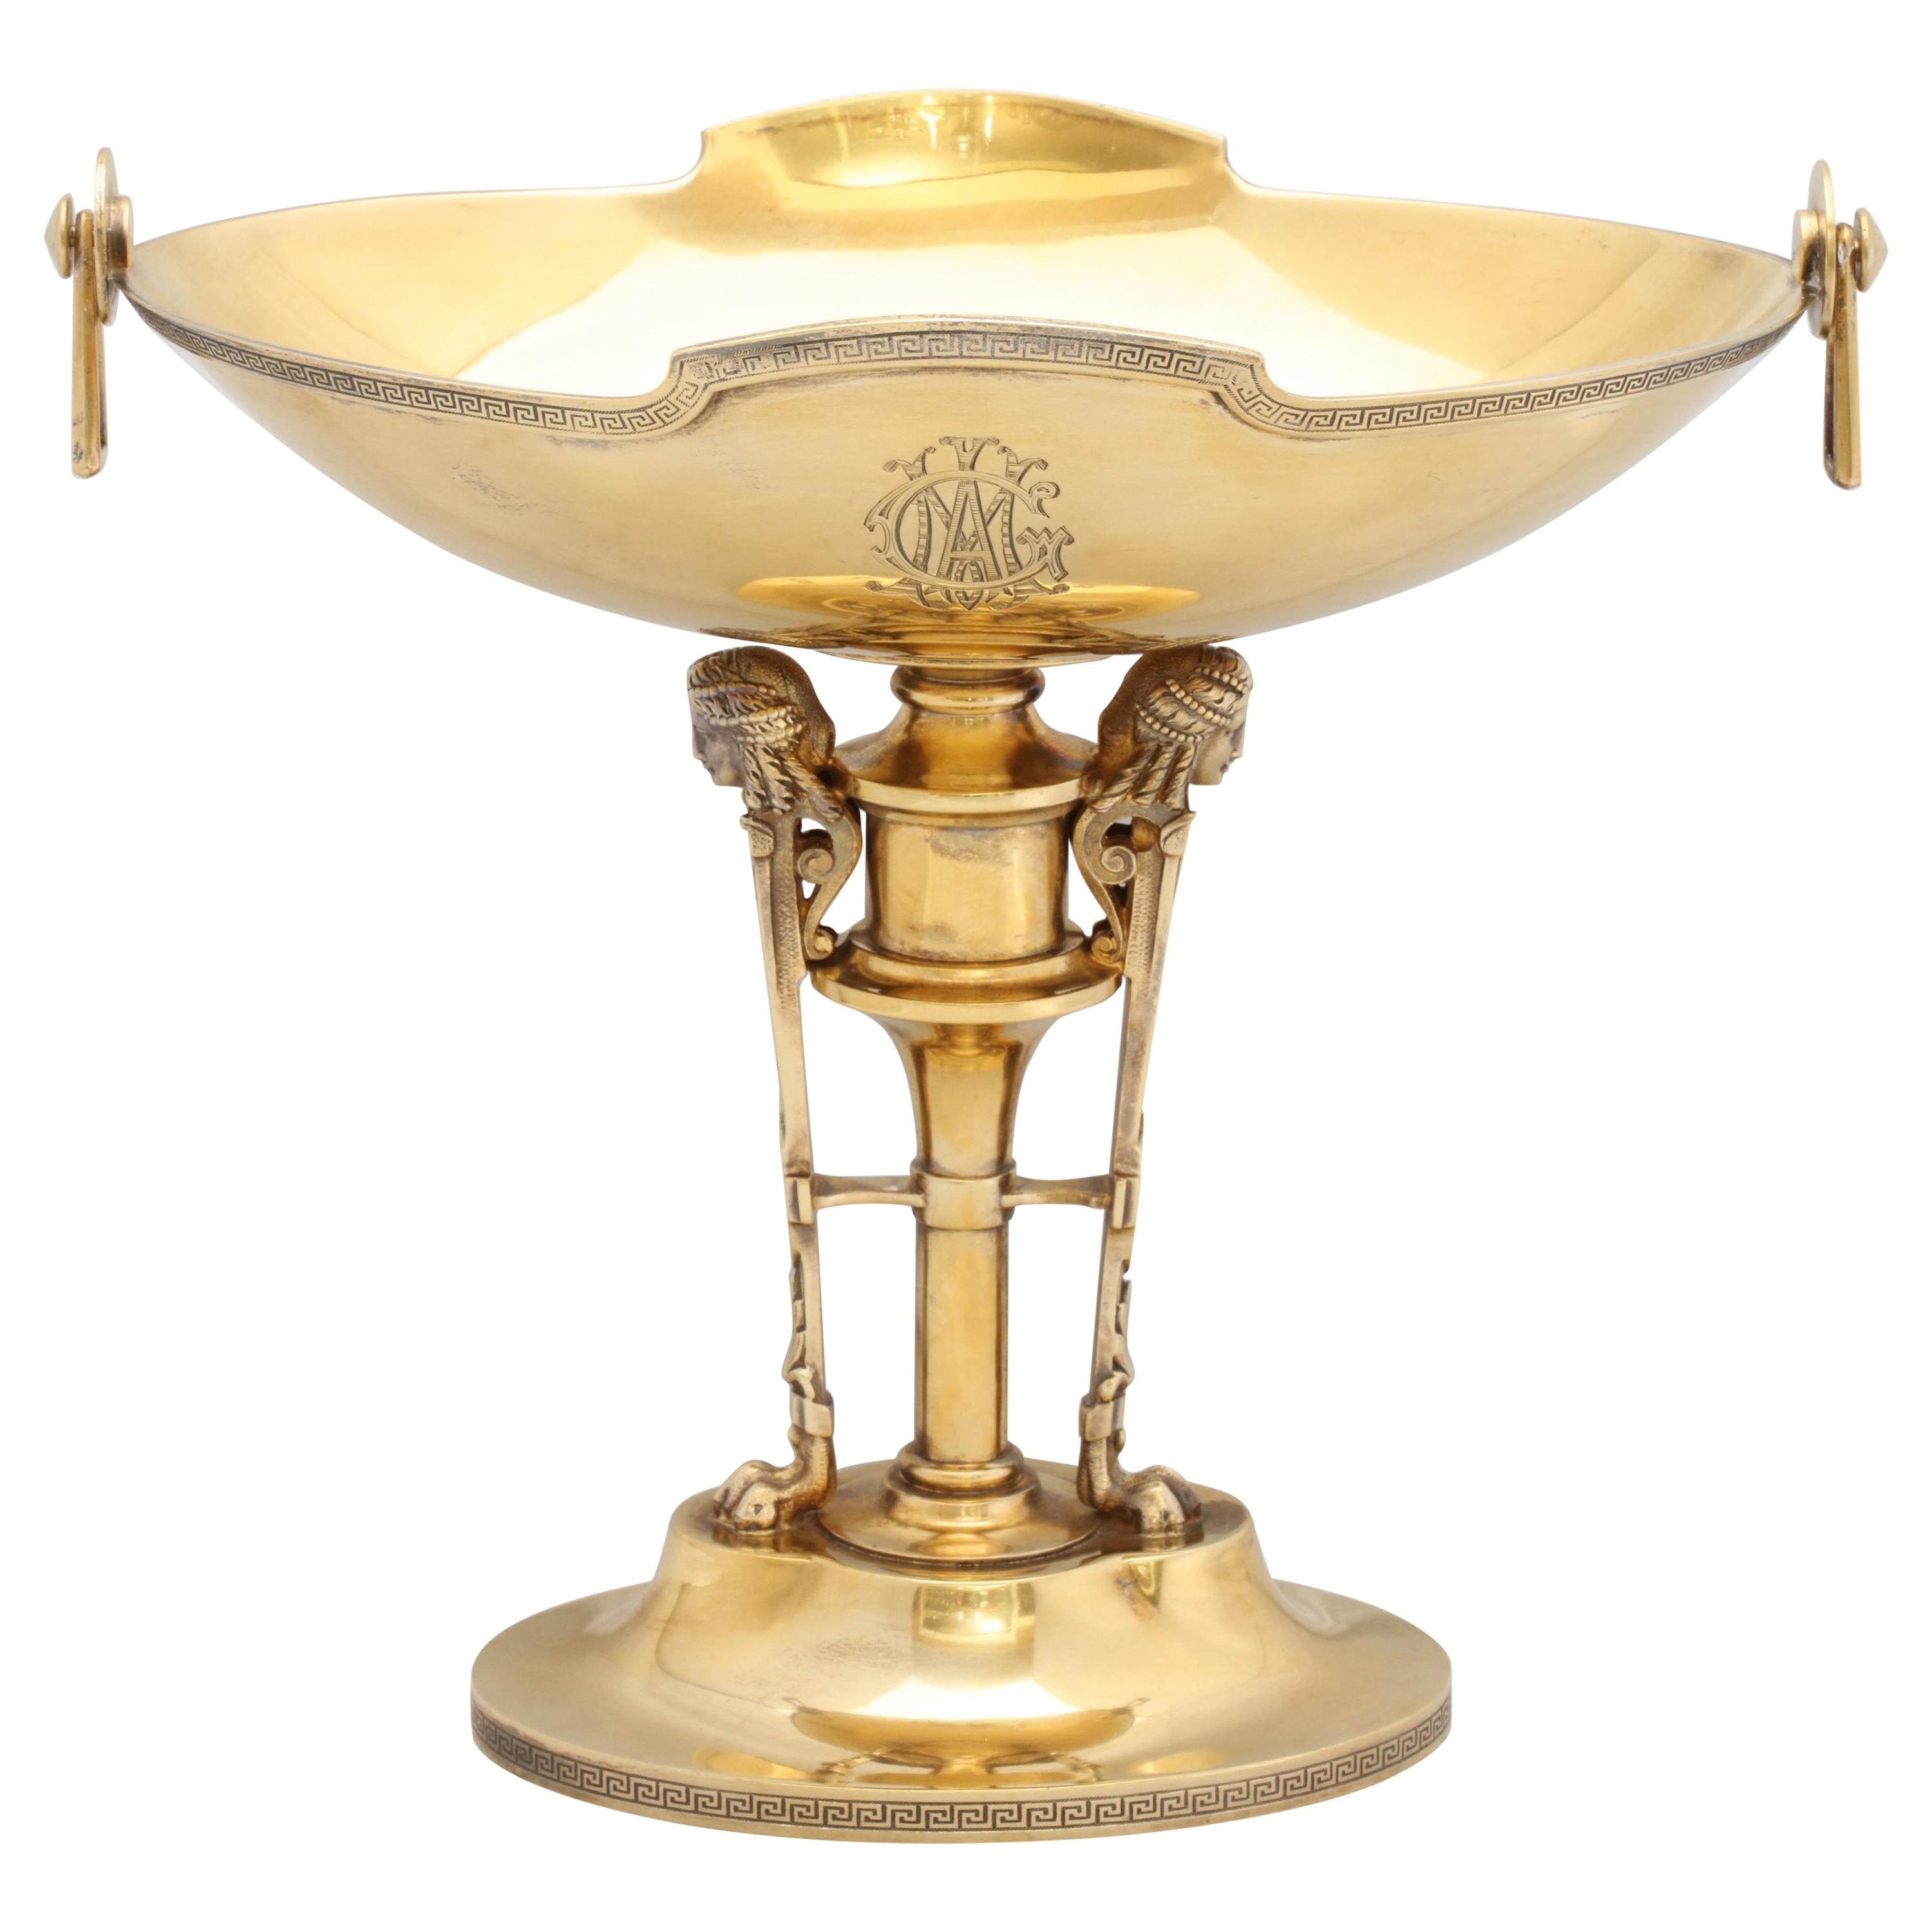 Neoclassical Sterling Silver Gilt Centrepiece by Gorham